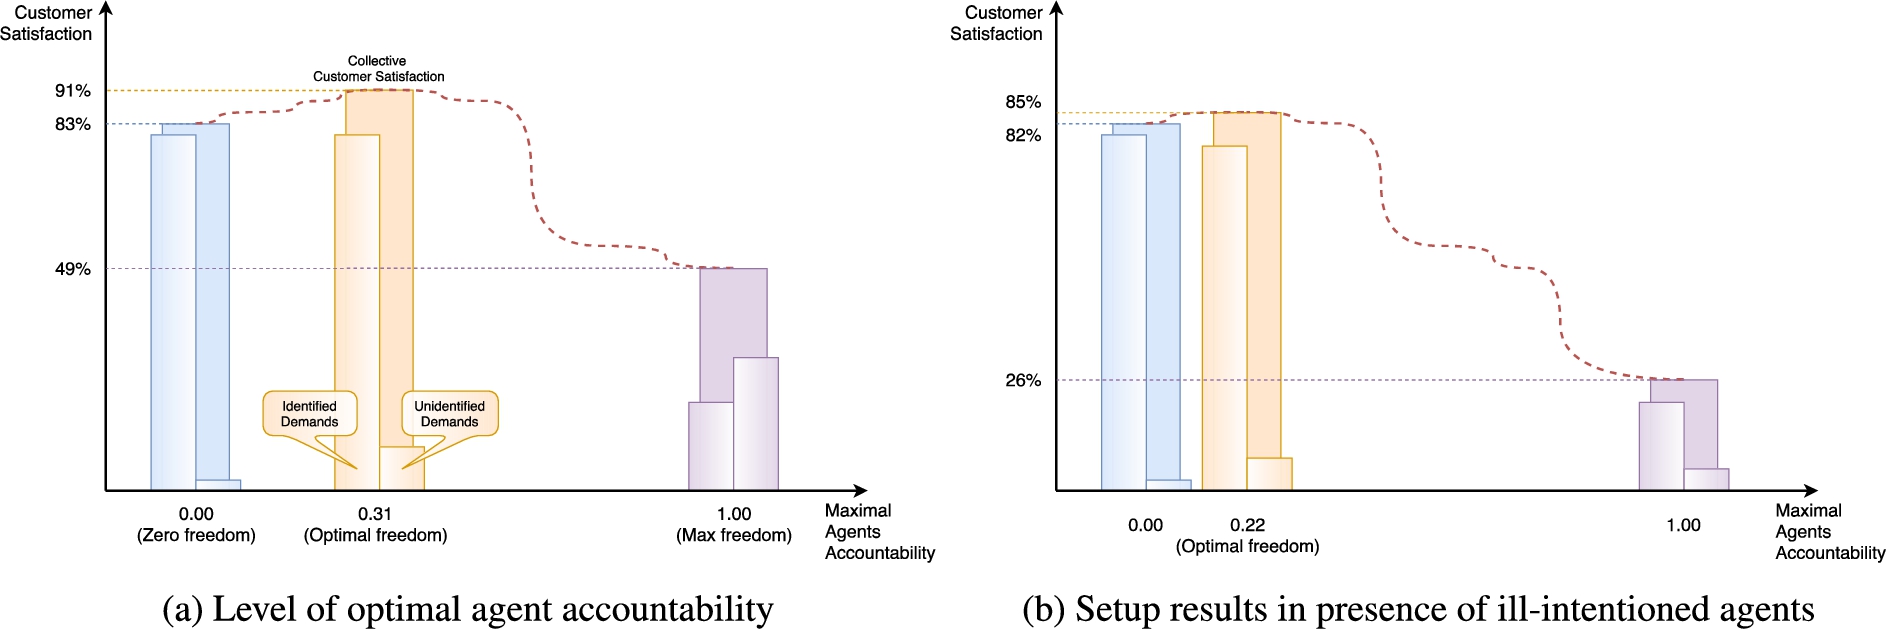 Effect of agent accountability on the collective customer satisfaction.